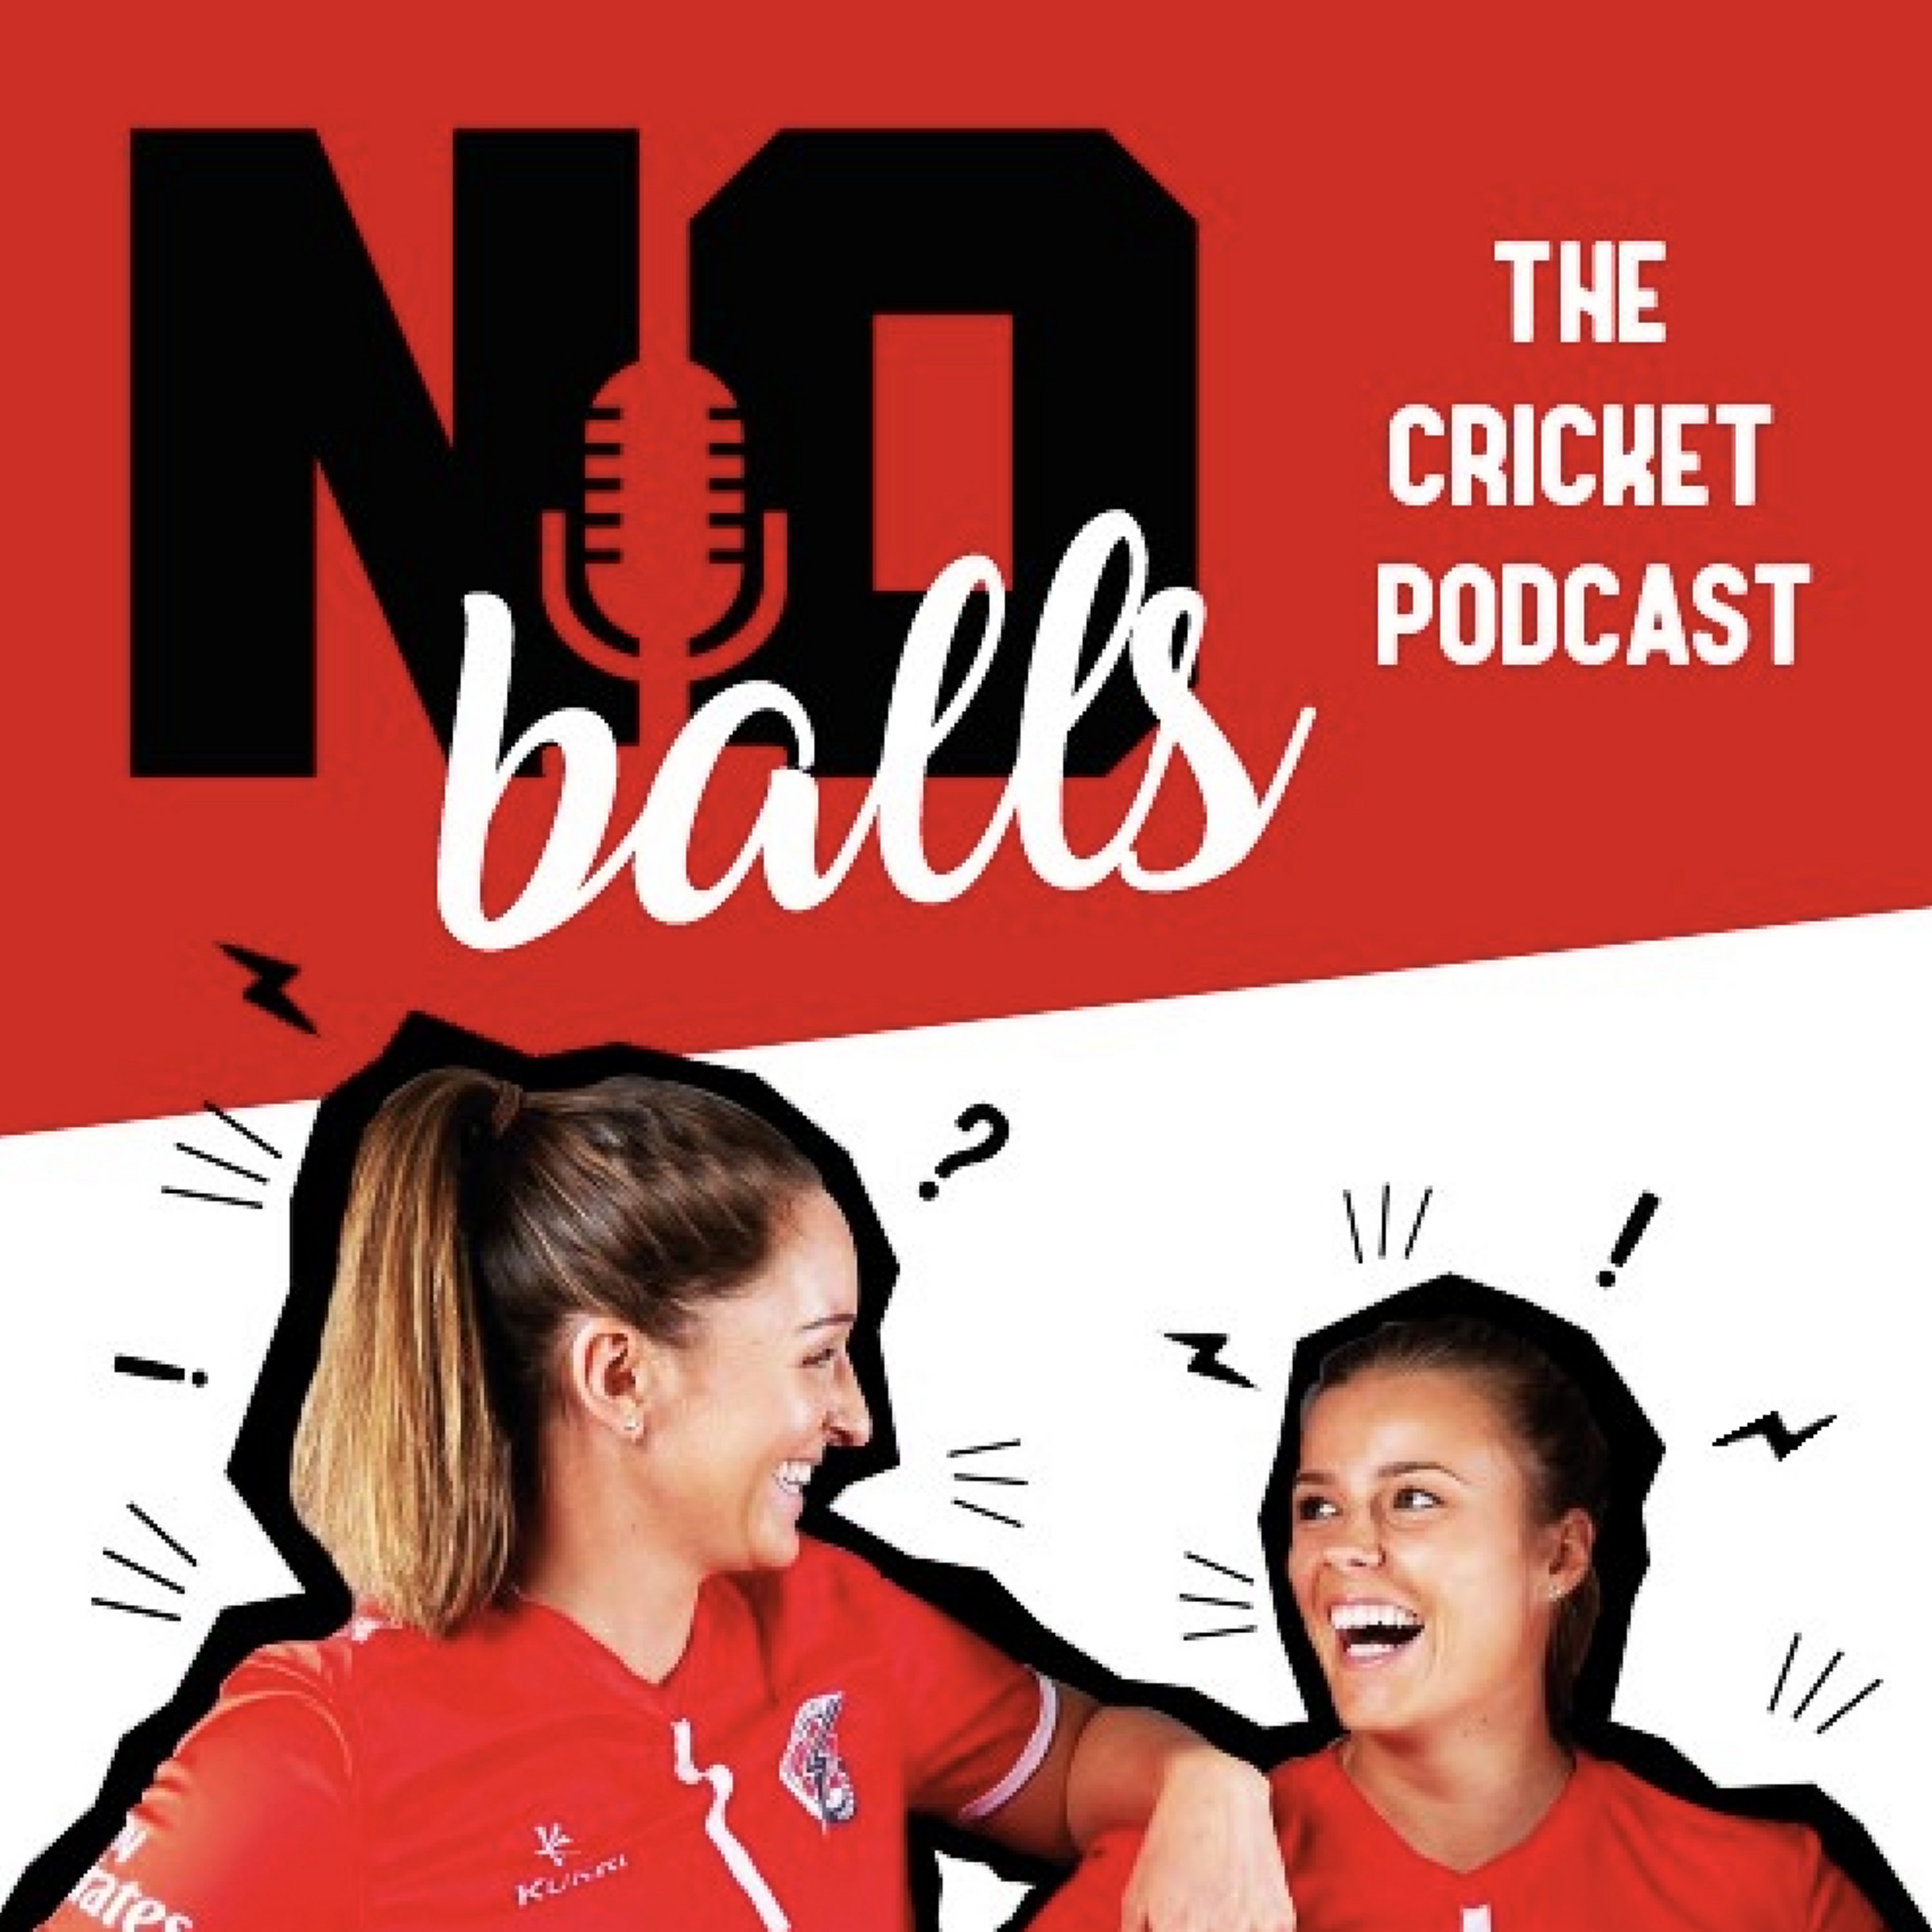 No Balls: The Cricket Podcast - The Brunt and Sciver episode